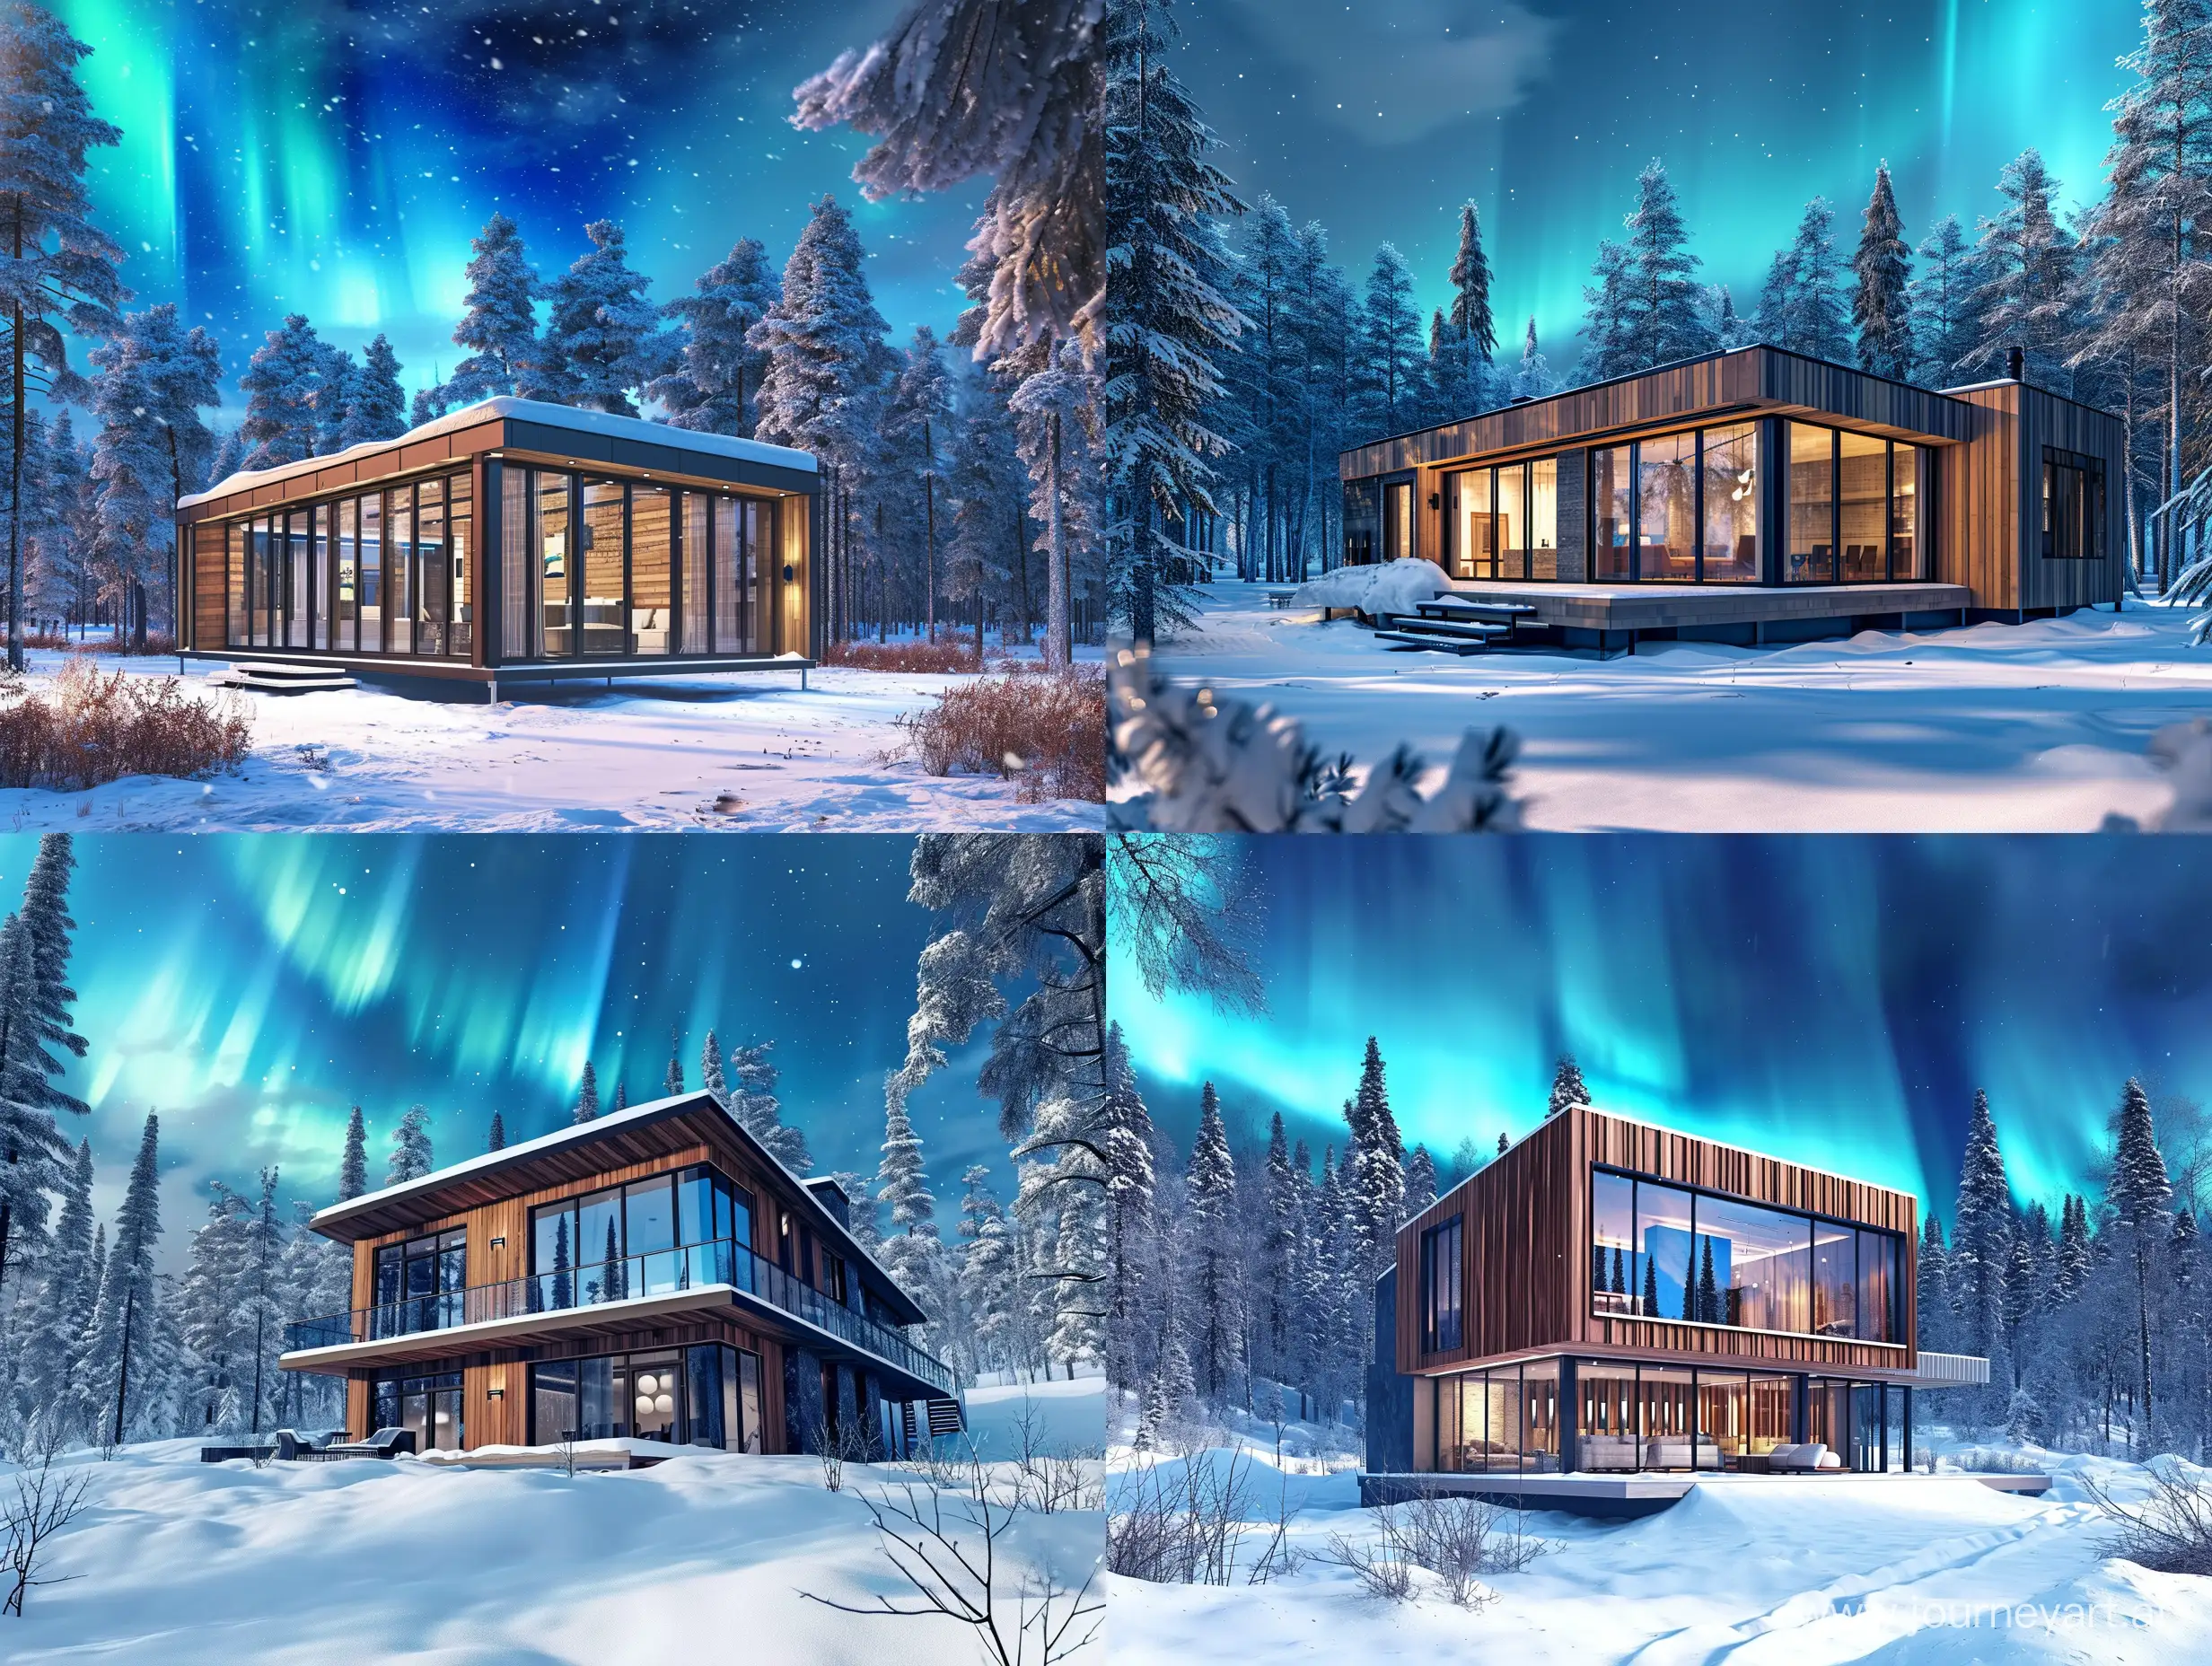 tha background is a snowy forest, in the sky there are blue northern lights, in the front is a modern house made from wood and big glass windows